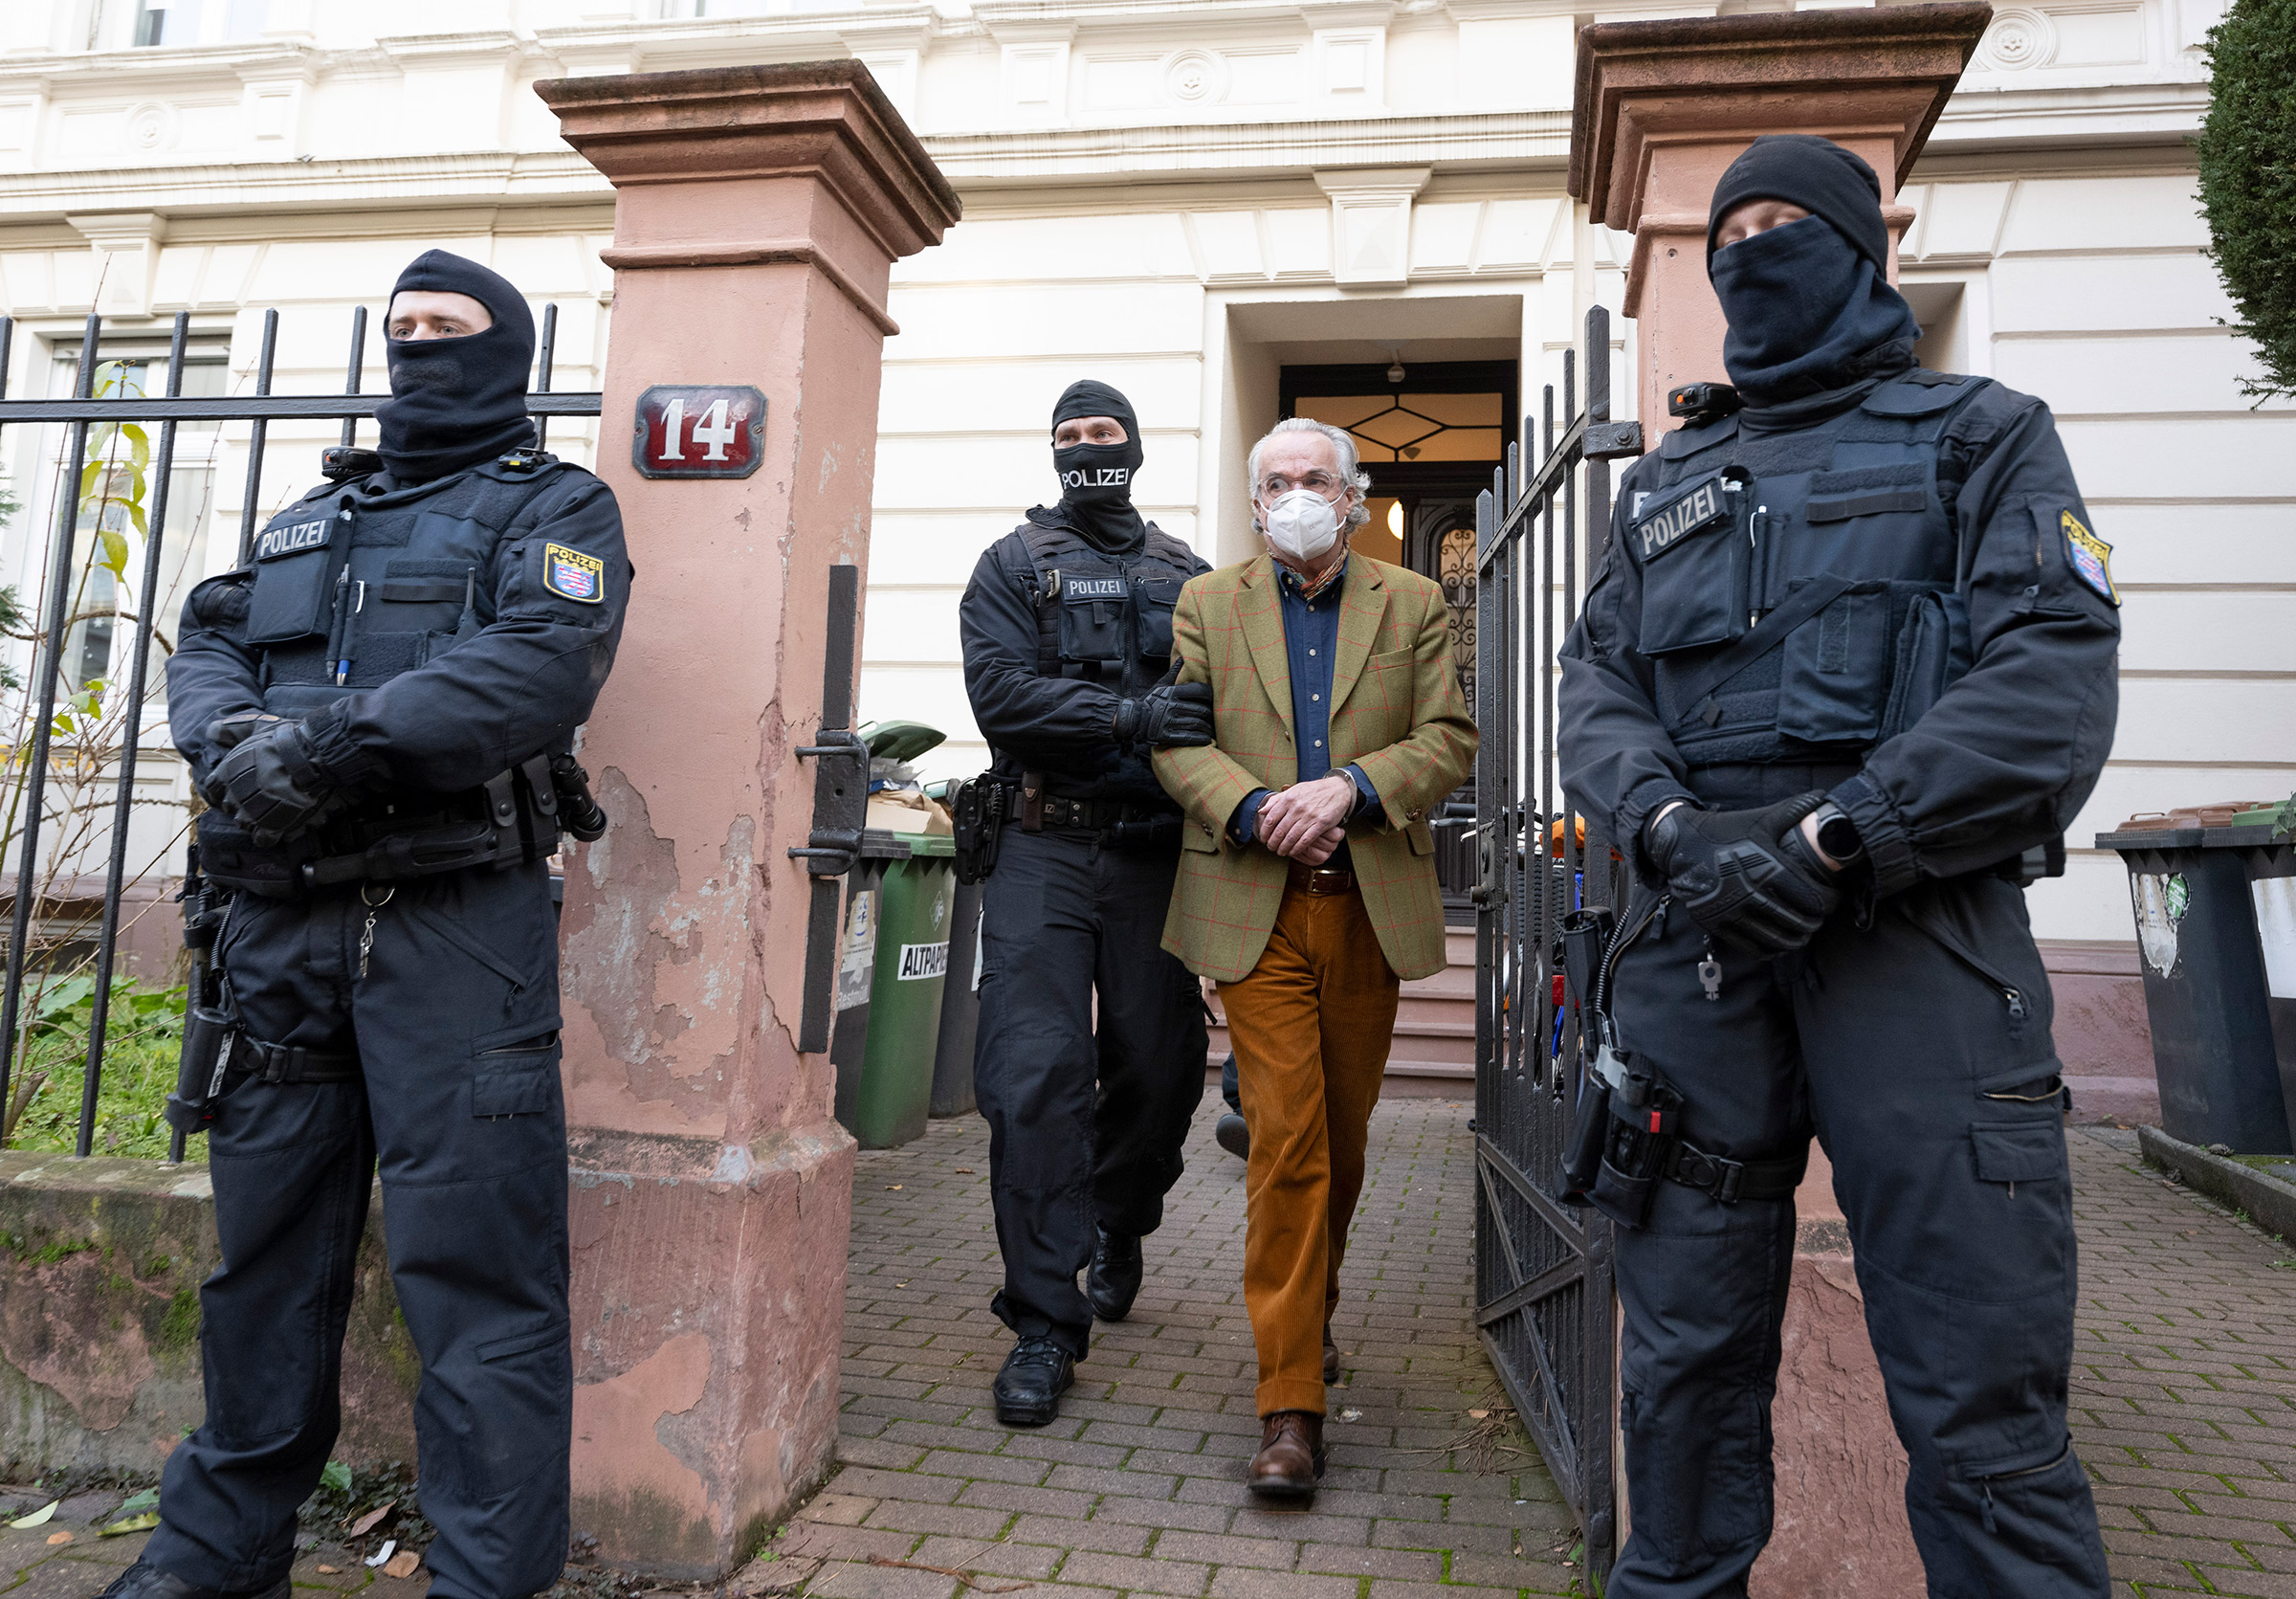 Police officers lead Heinrich XIII Prince Reuss to a police vehicle during a raid in Frankfurt, Germany on Dec. 7, 2022. (Boris Roessler—picture-alliance/dpa/AP)